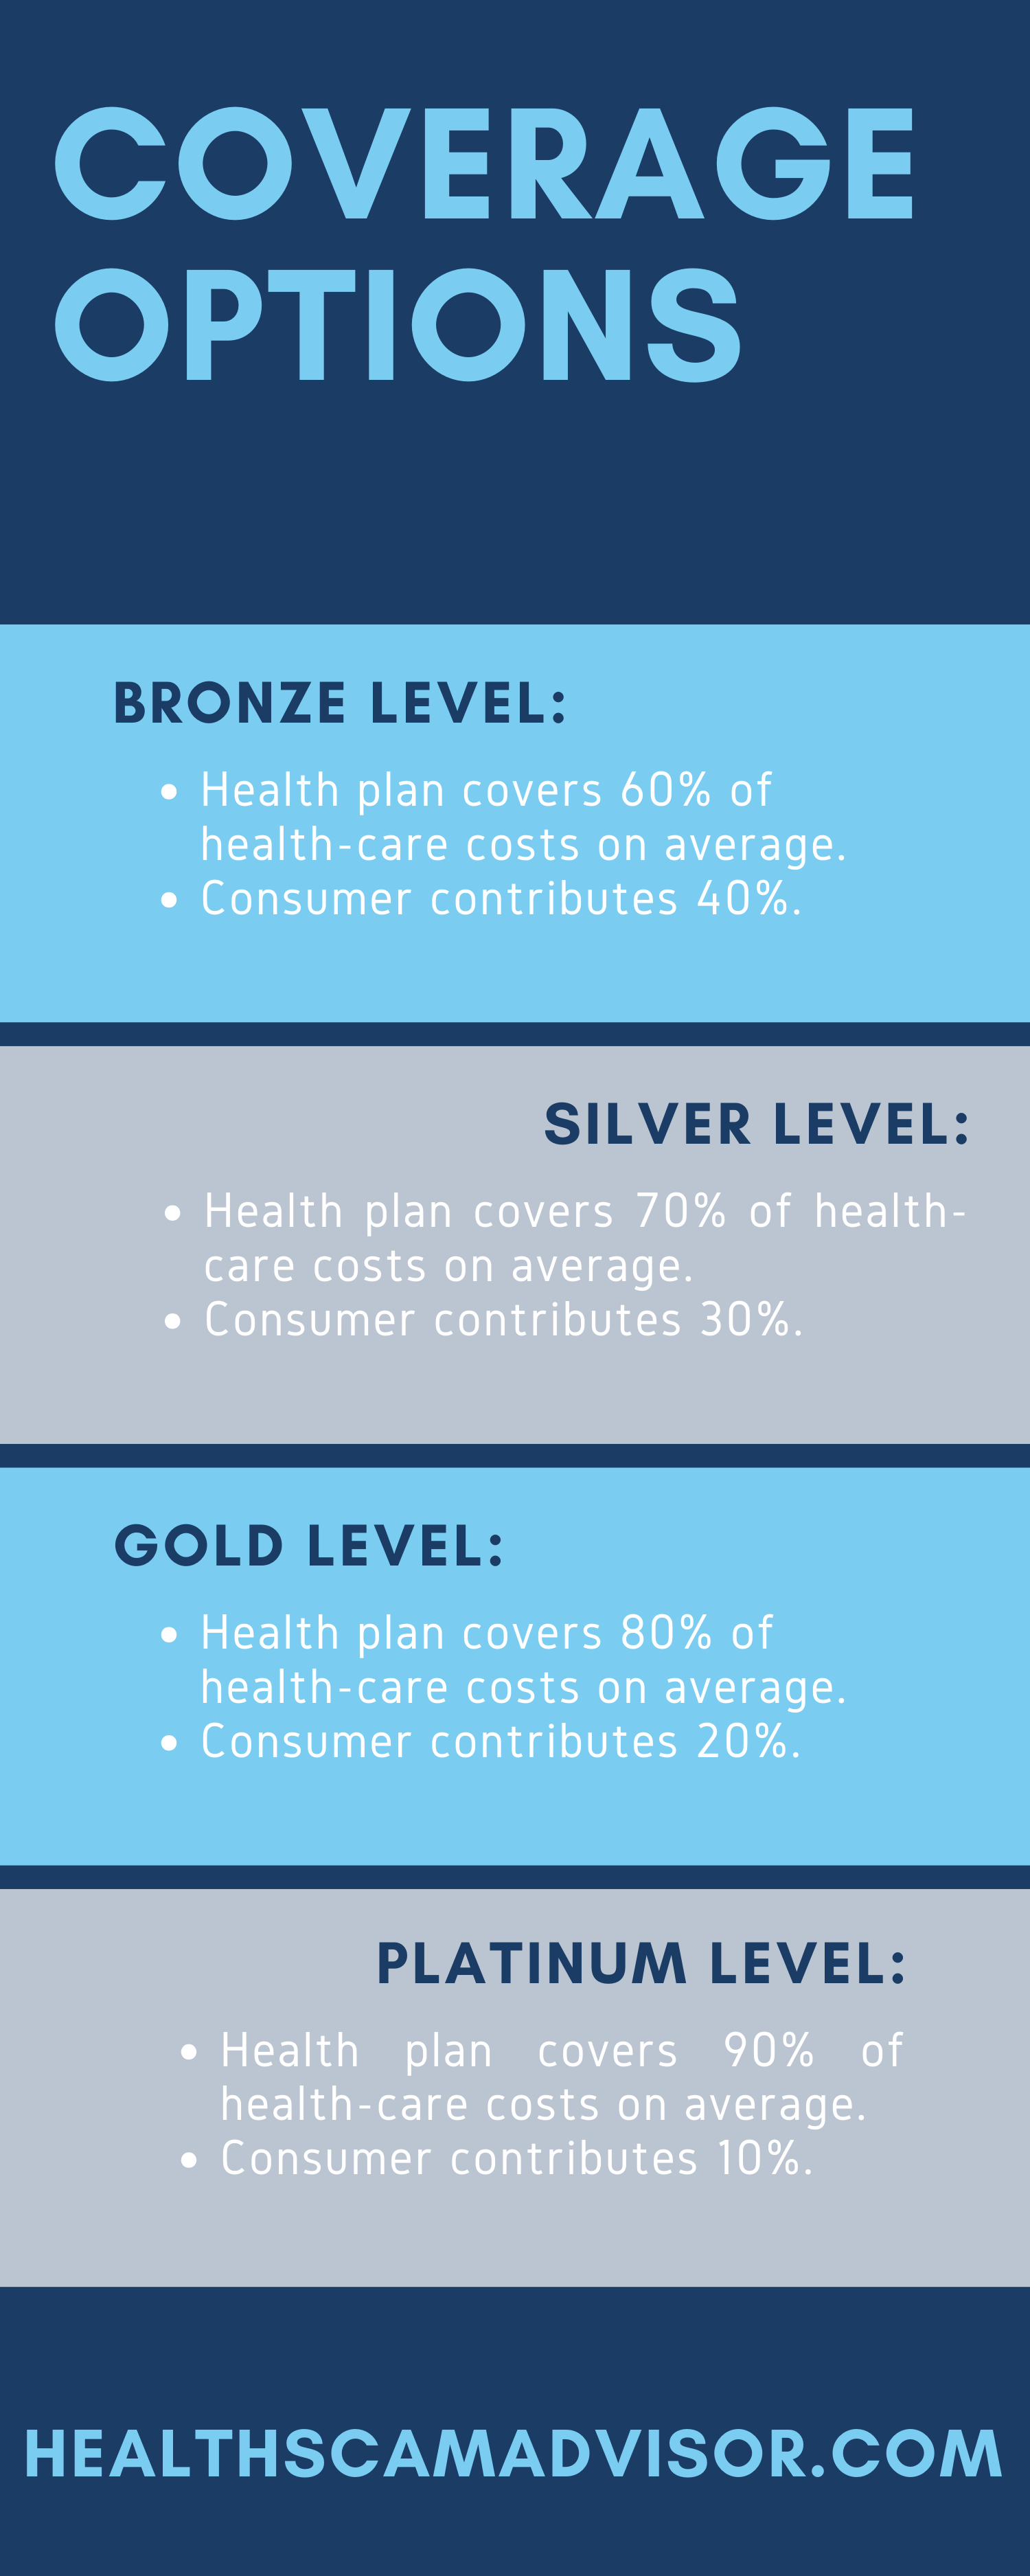 An infographic for Coverage Options